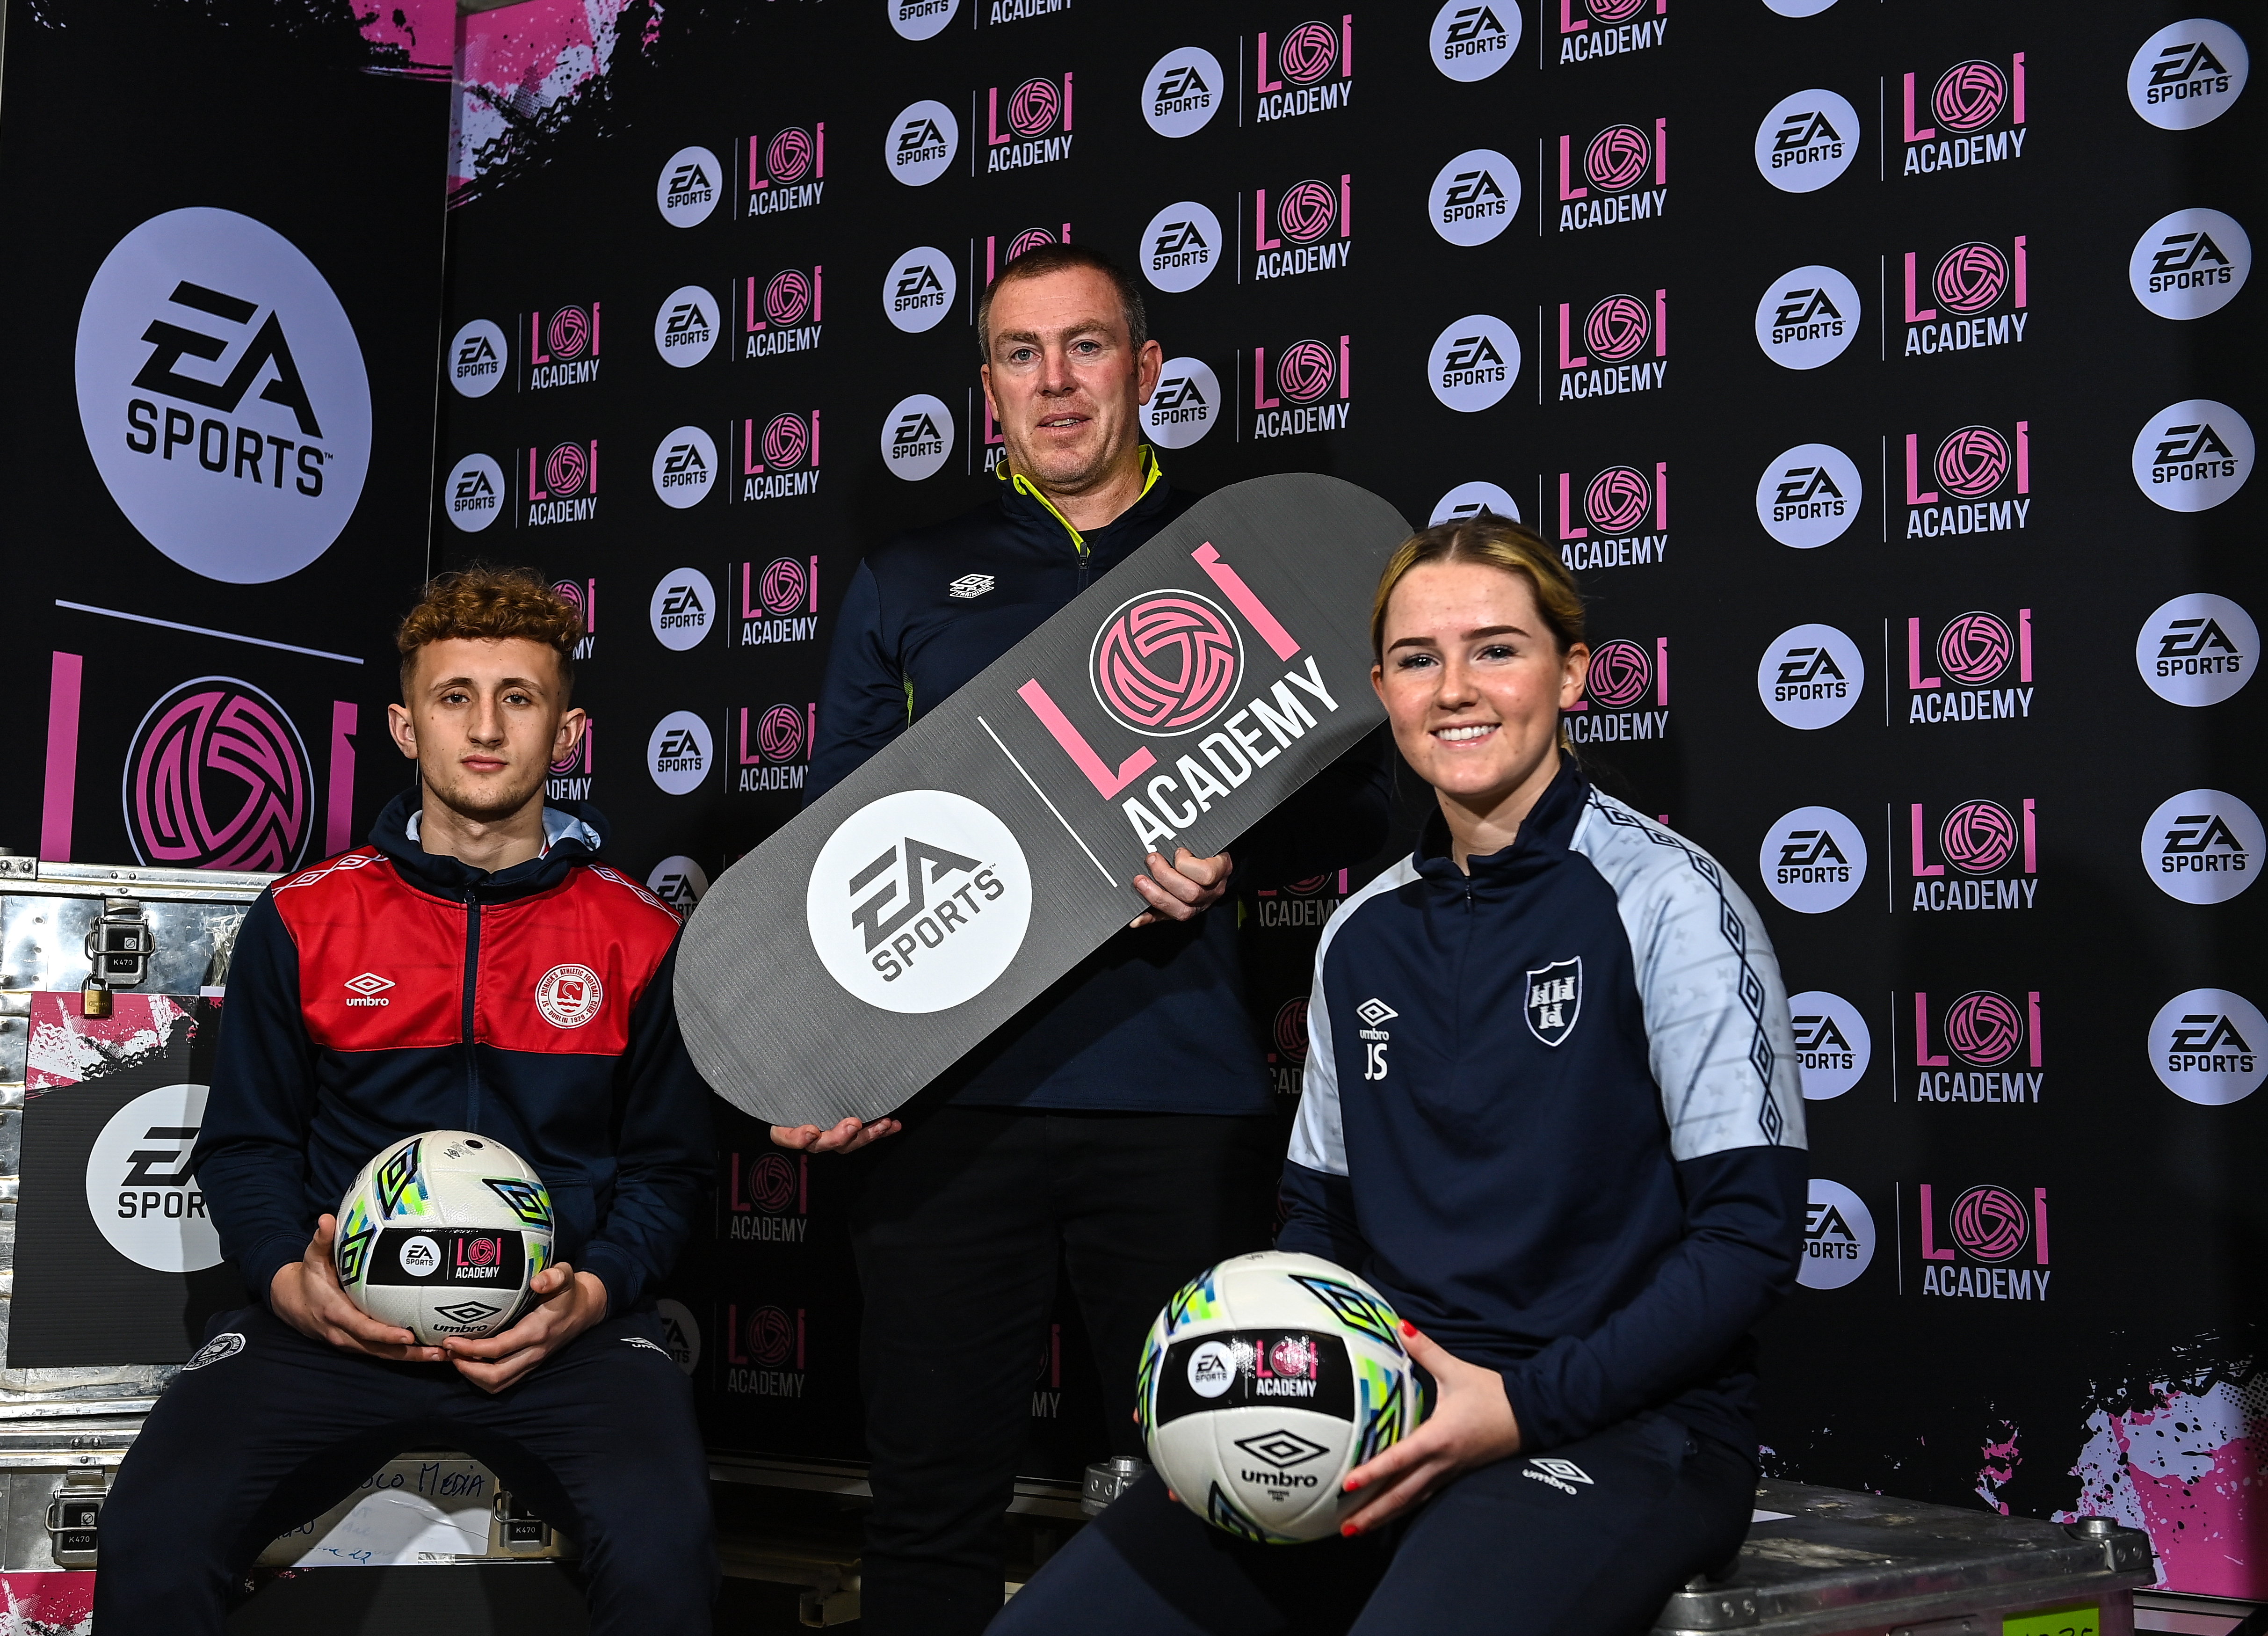 21 February 2023; Former Republic of Ireland international Richard Dunne with Sam Curtis of St Patrick's Athletic and Jessie Stapleton of Shelbourne at the launch of the EA SPORTS LOI Academy development programme held at FAI Headquarters in Abbotstown, Dublin. Photo by Piaras Ó Mídheach/Sportsfile *** NO REPRODUCTION FEE ***